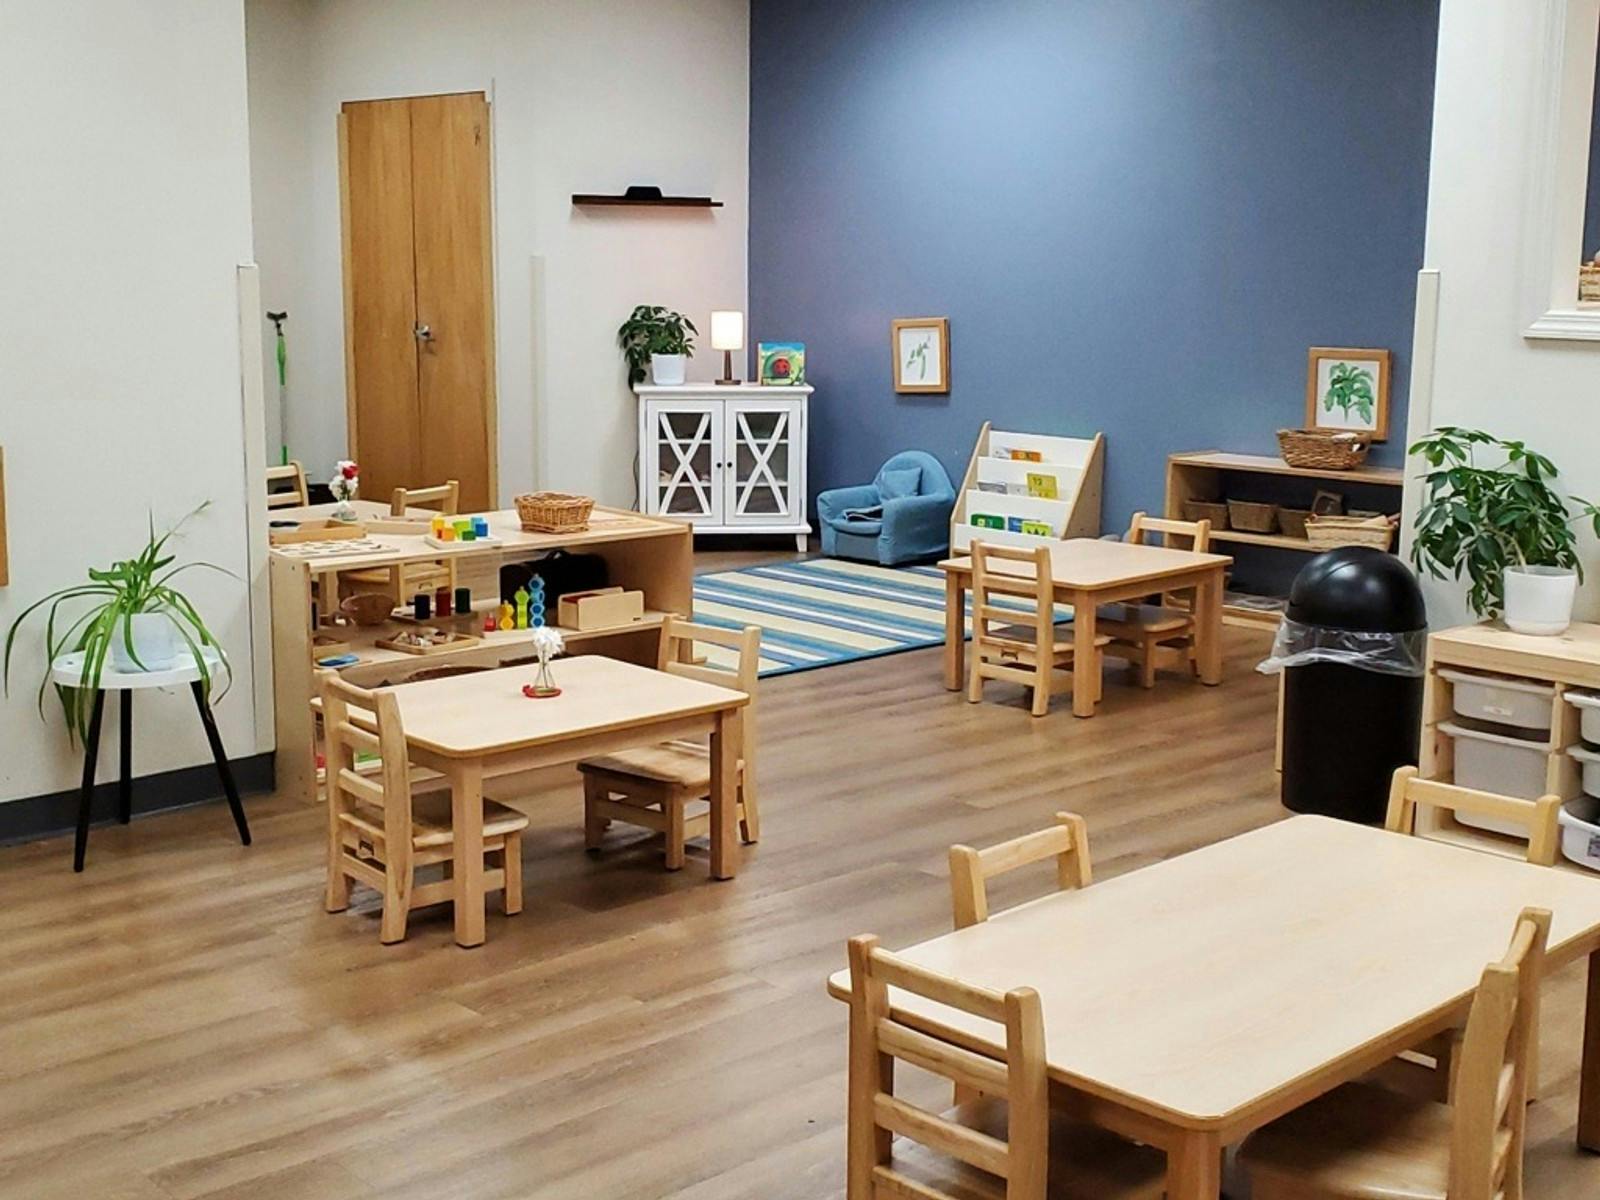 Our toddler room is for preschoolers. 